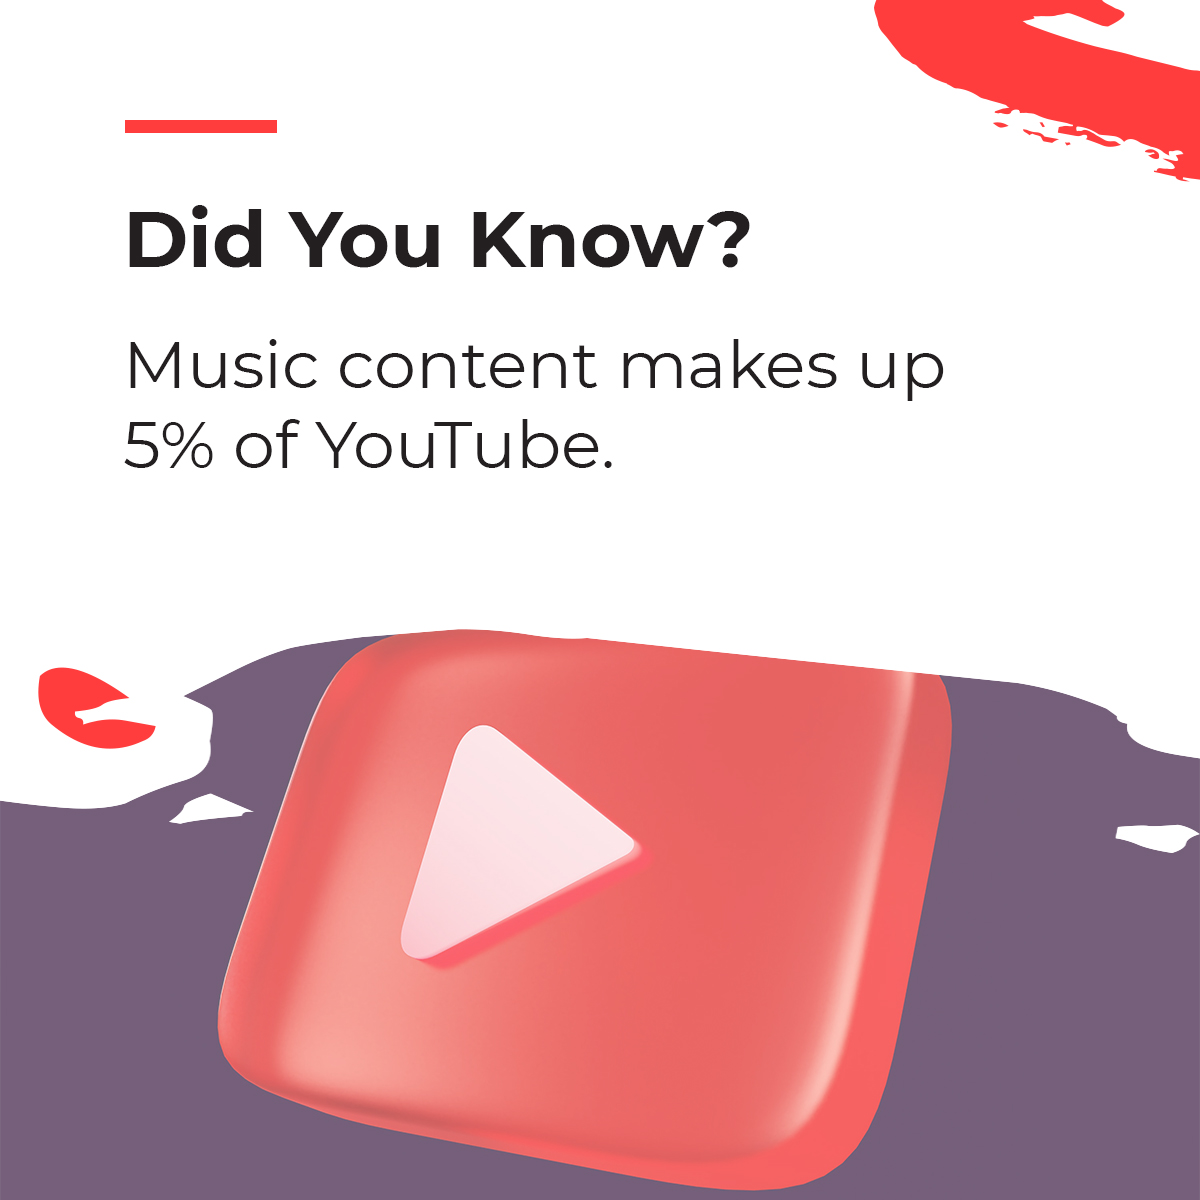 However, they count for 20% of YouTube’s total views.

#technologyfacts #technologytrends